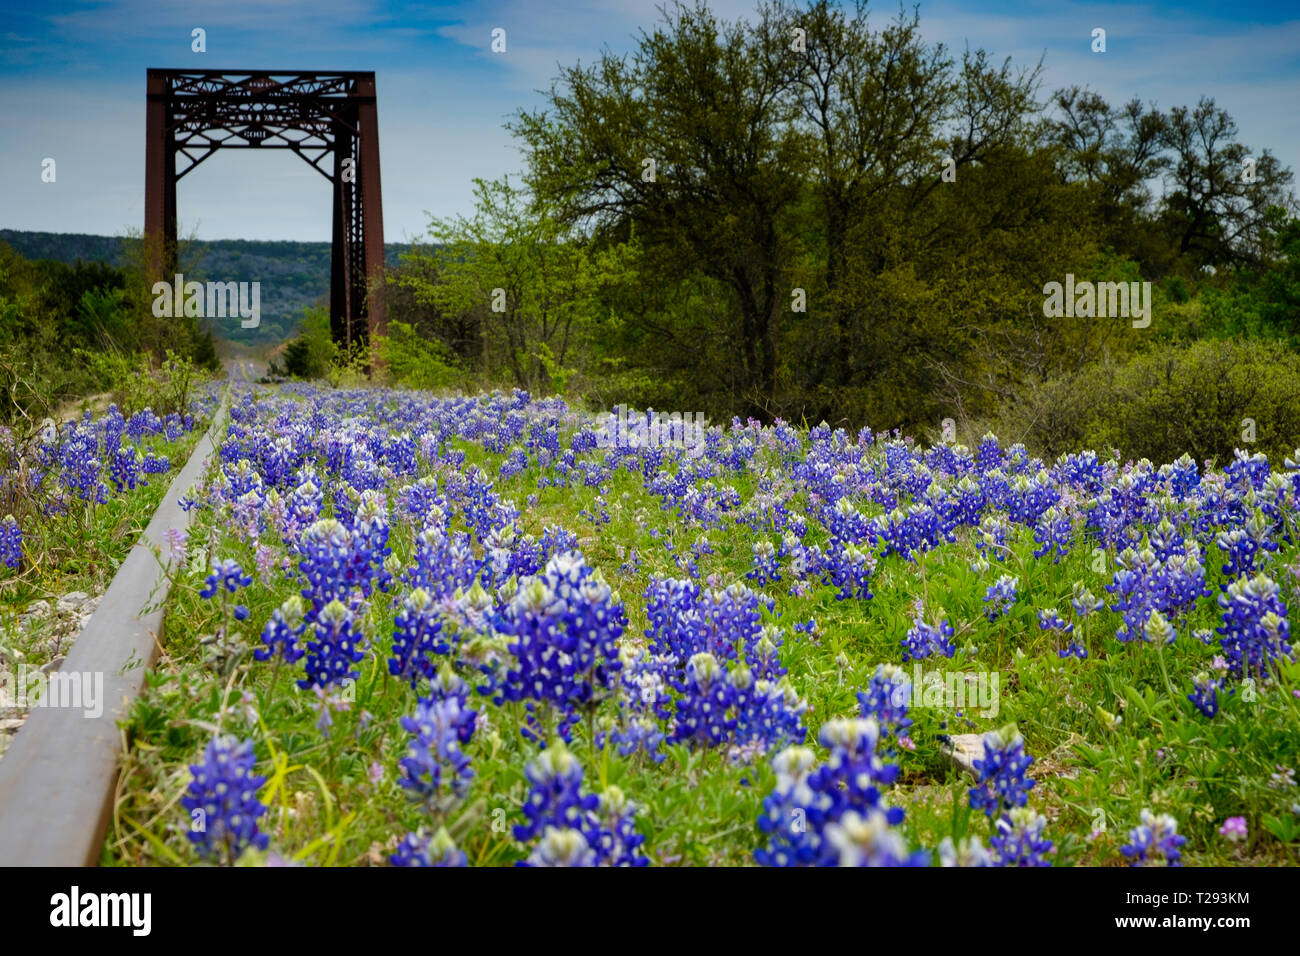 Bluebonnets bloom along abandoned railroad tracks in the Texas Hill Country between Austin and San Antonio. USA. Stock Photo